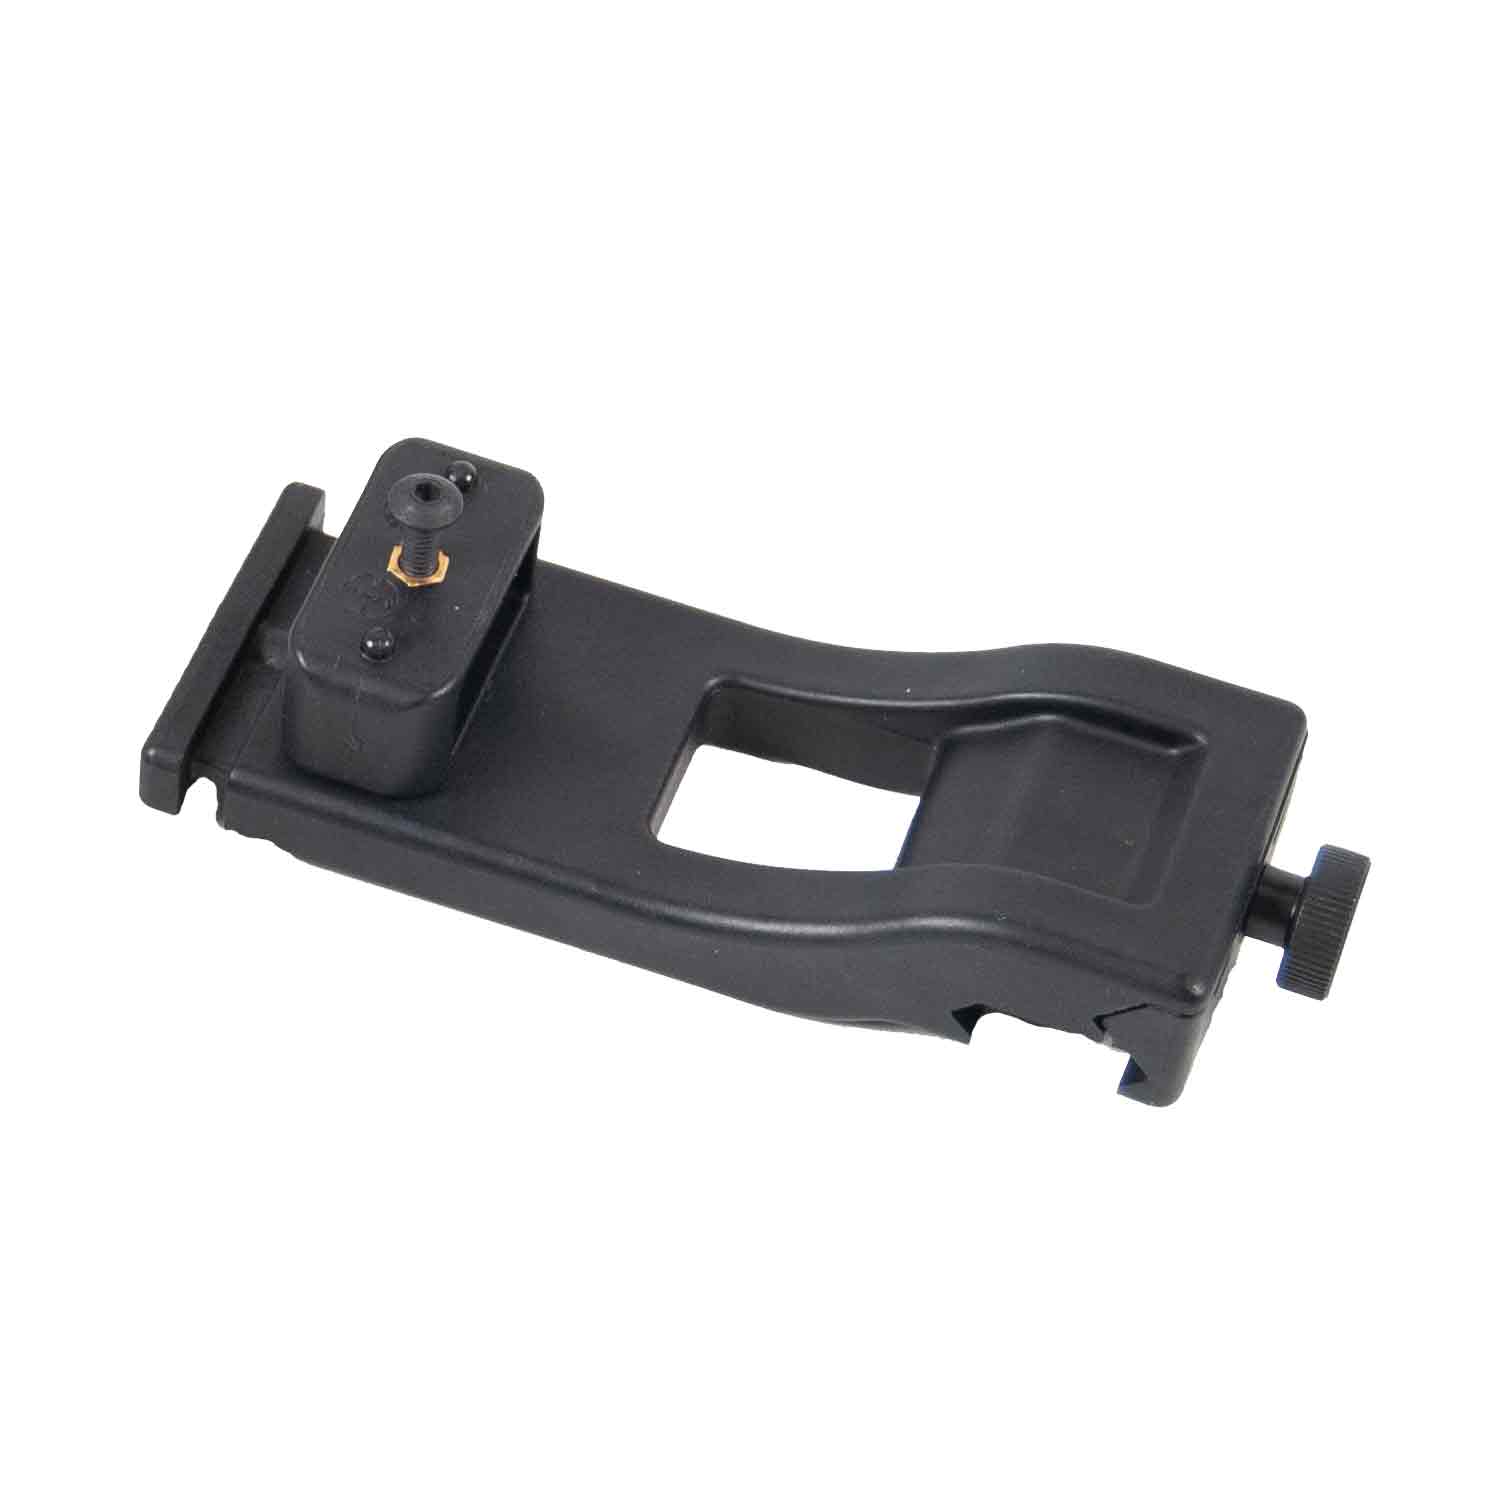 Ten Point Quick Disconnect Quiver Mount for Picatinny Rail